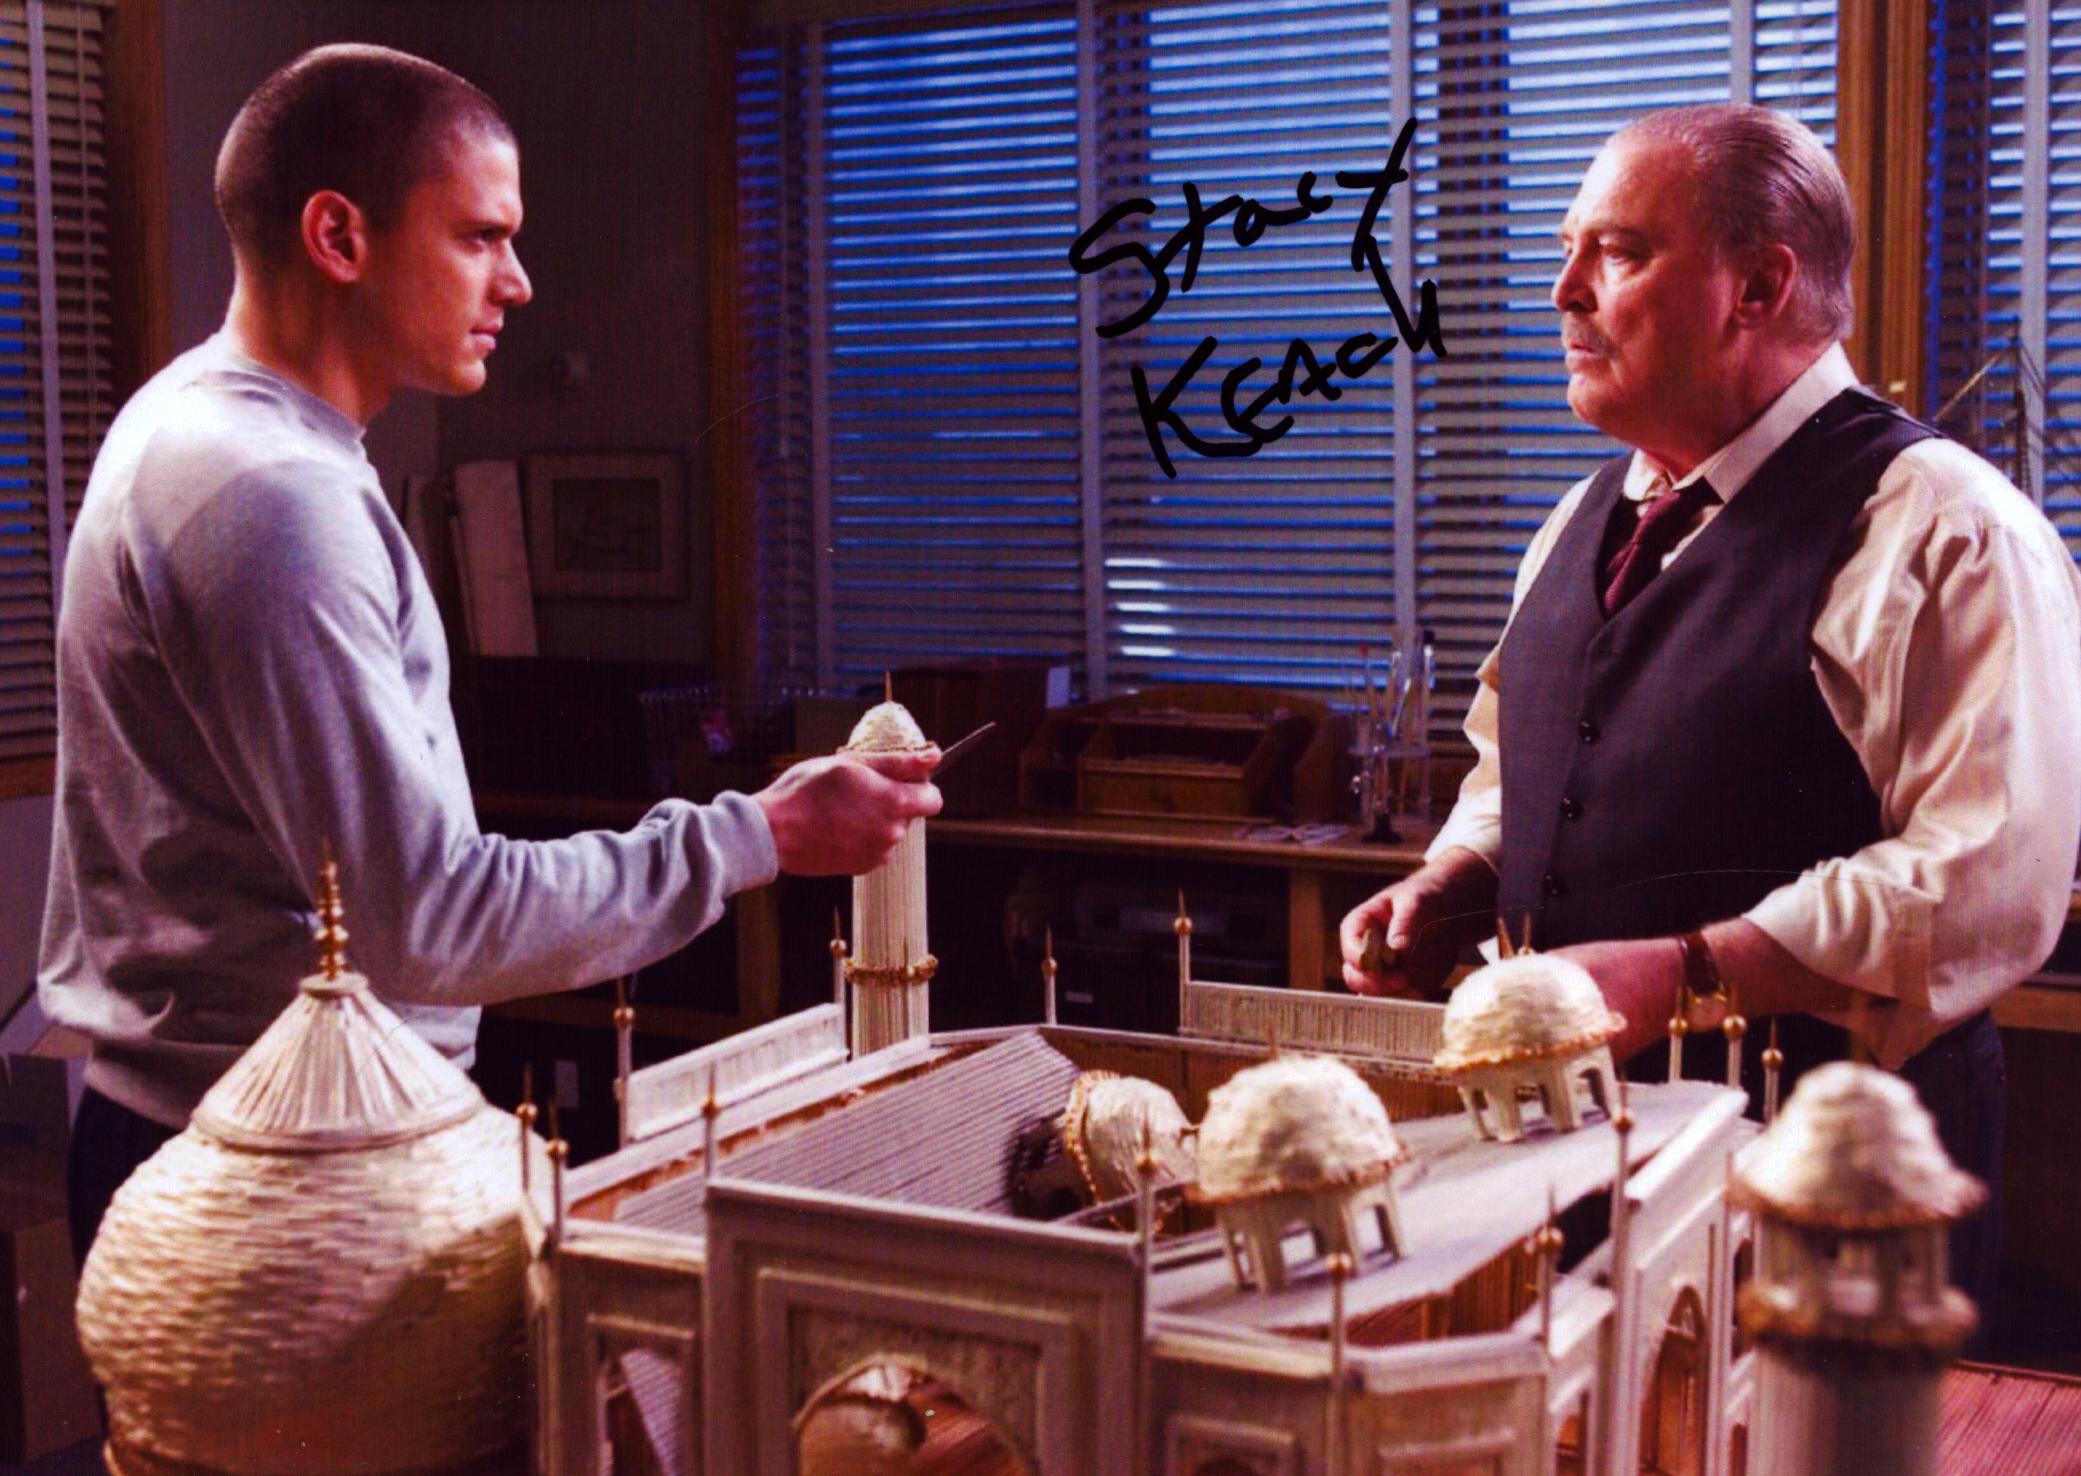 Stacy Keach signed 7x5 inch Prison Break colour photo. Good Condition. All autographs come with a